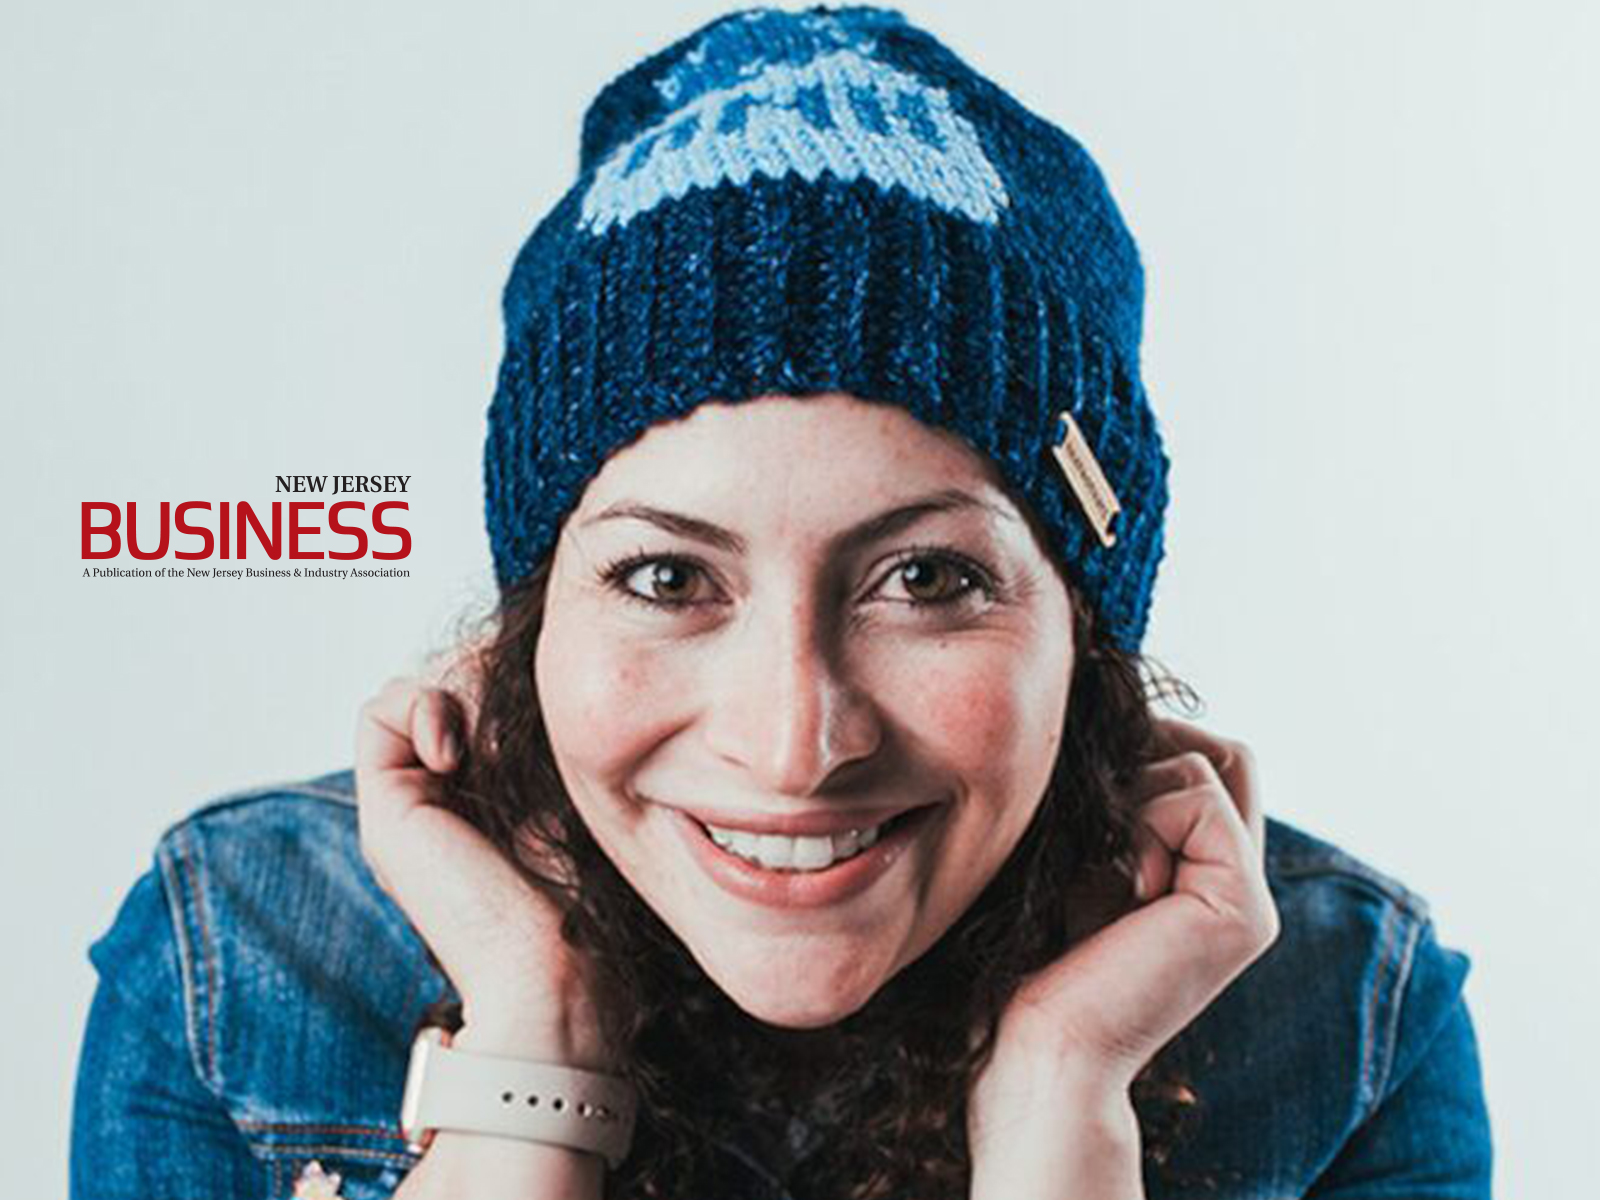 New Jersey Business logo overlaid on image of Shira in blue hat